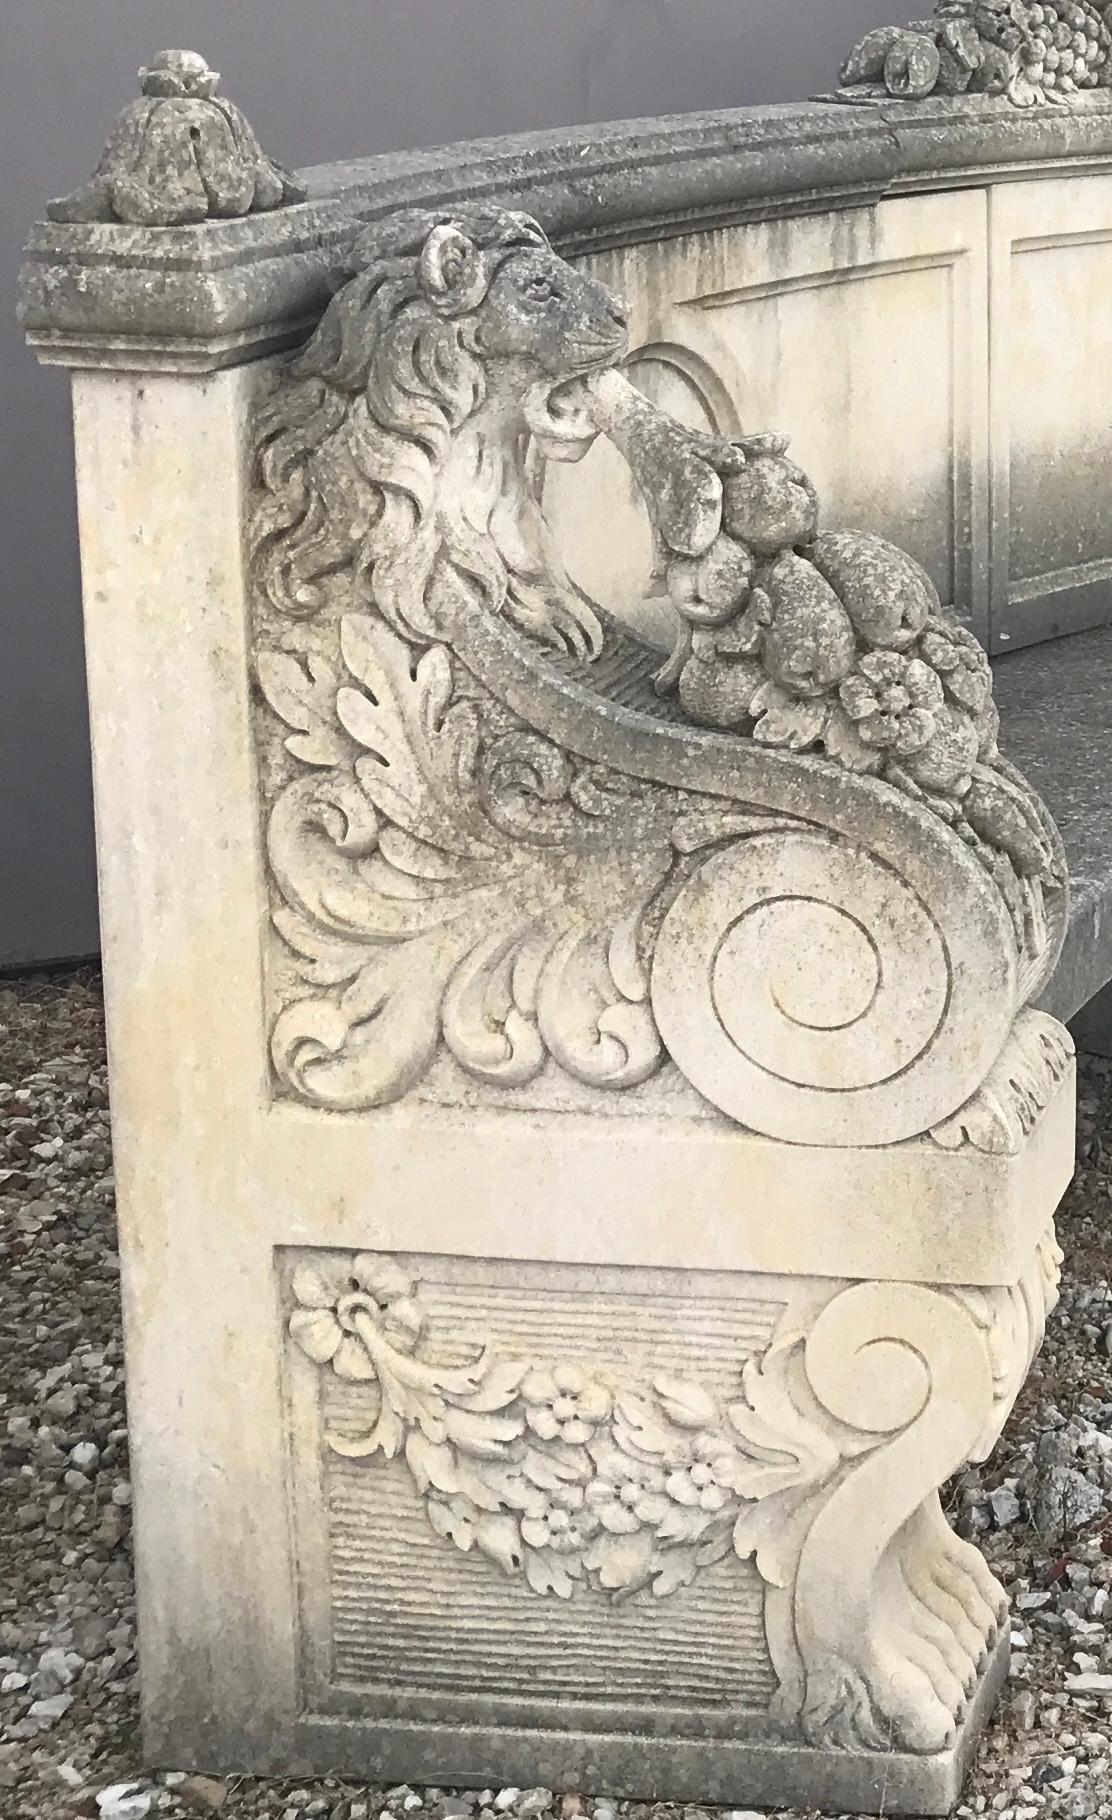 Exceptional craftsmanship with stunning motifs in relief in ' Pietra di Vicenza'. Rich decoration of the armrest with Griffins and garland -
Great decoration for Garden and Patio furniture.
